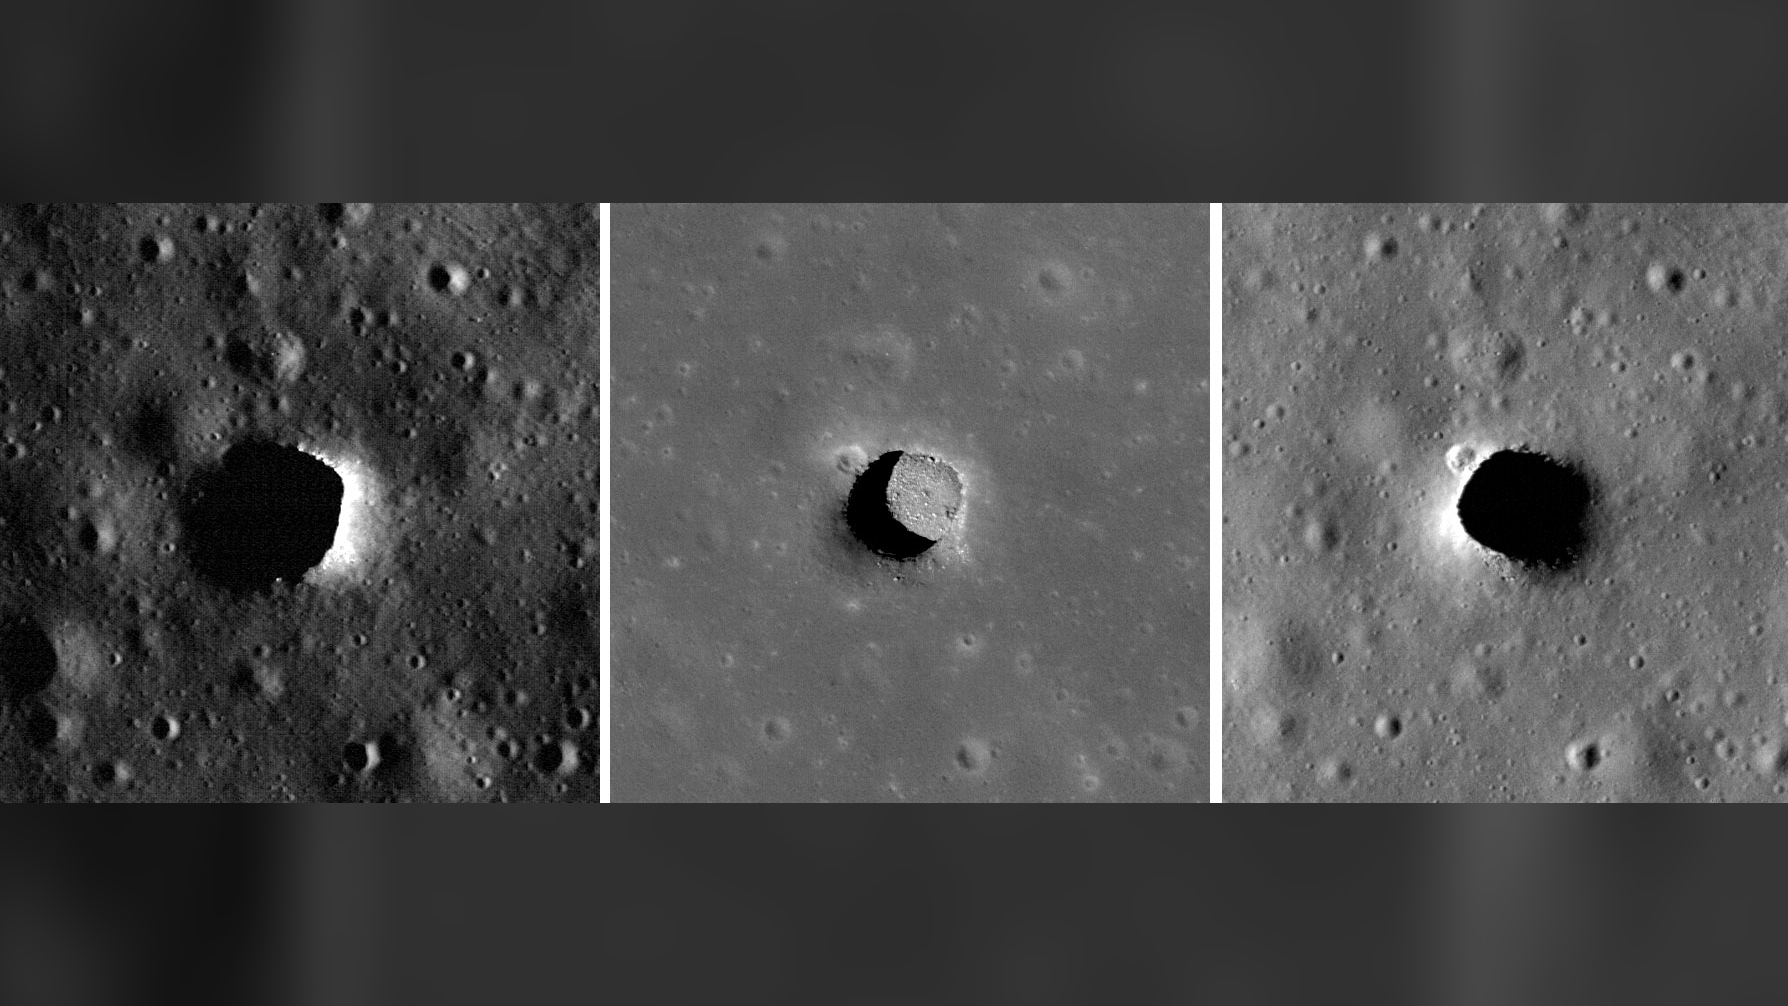 NASA's Lunar Reconnaissance Orbiter Camera's images of the Tranquillitatis pit with different lighting